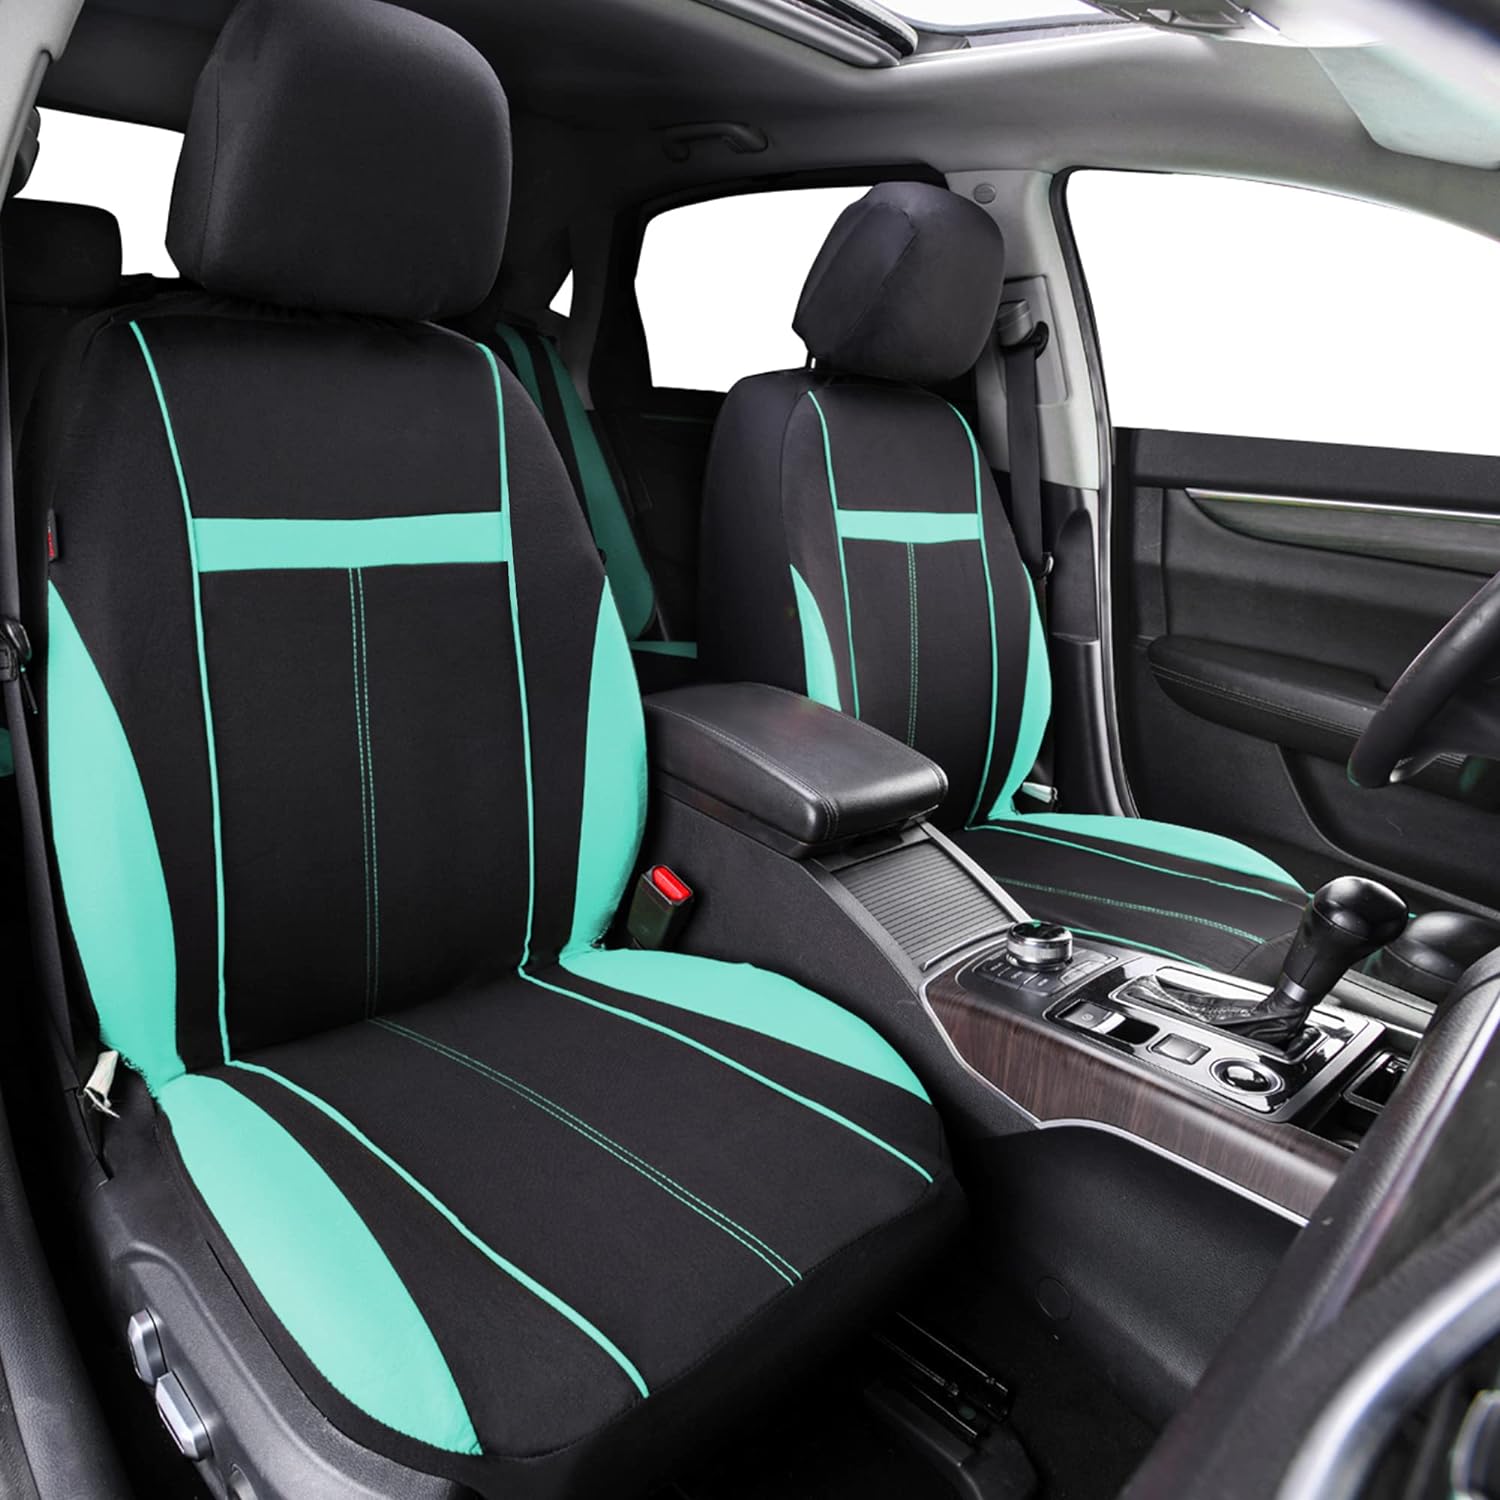 CAR PASS Line Rider Microfiber Leather Sporty Steering Wheel Cover and Sporty Cloth Full Set Car Seat Covers,Fits for 95% Truck,SUV,Cars, Anti-Slip Safety Comfortable Desgin (Black Mint Blue)